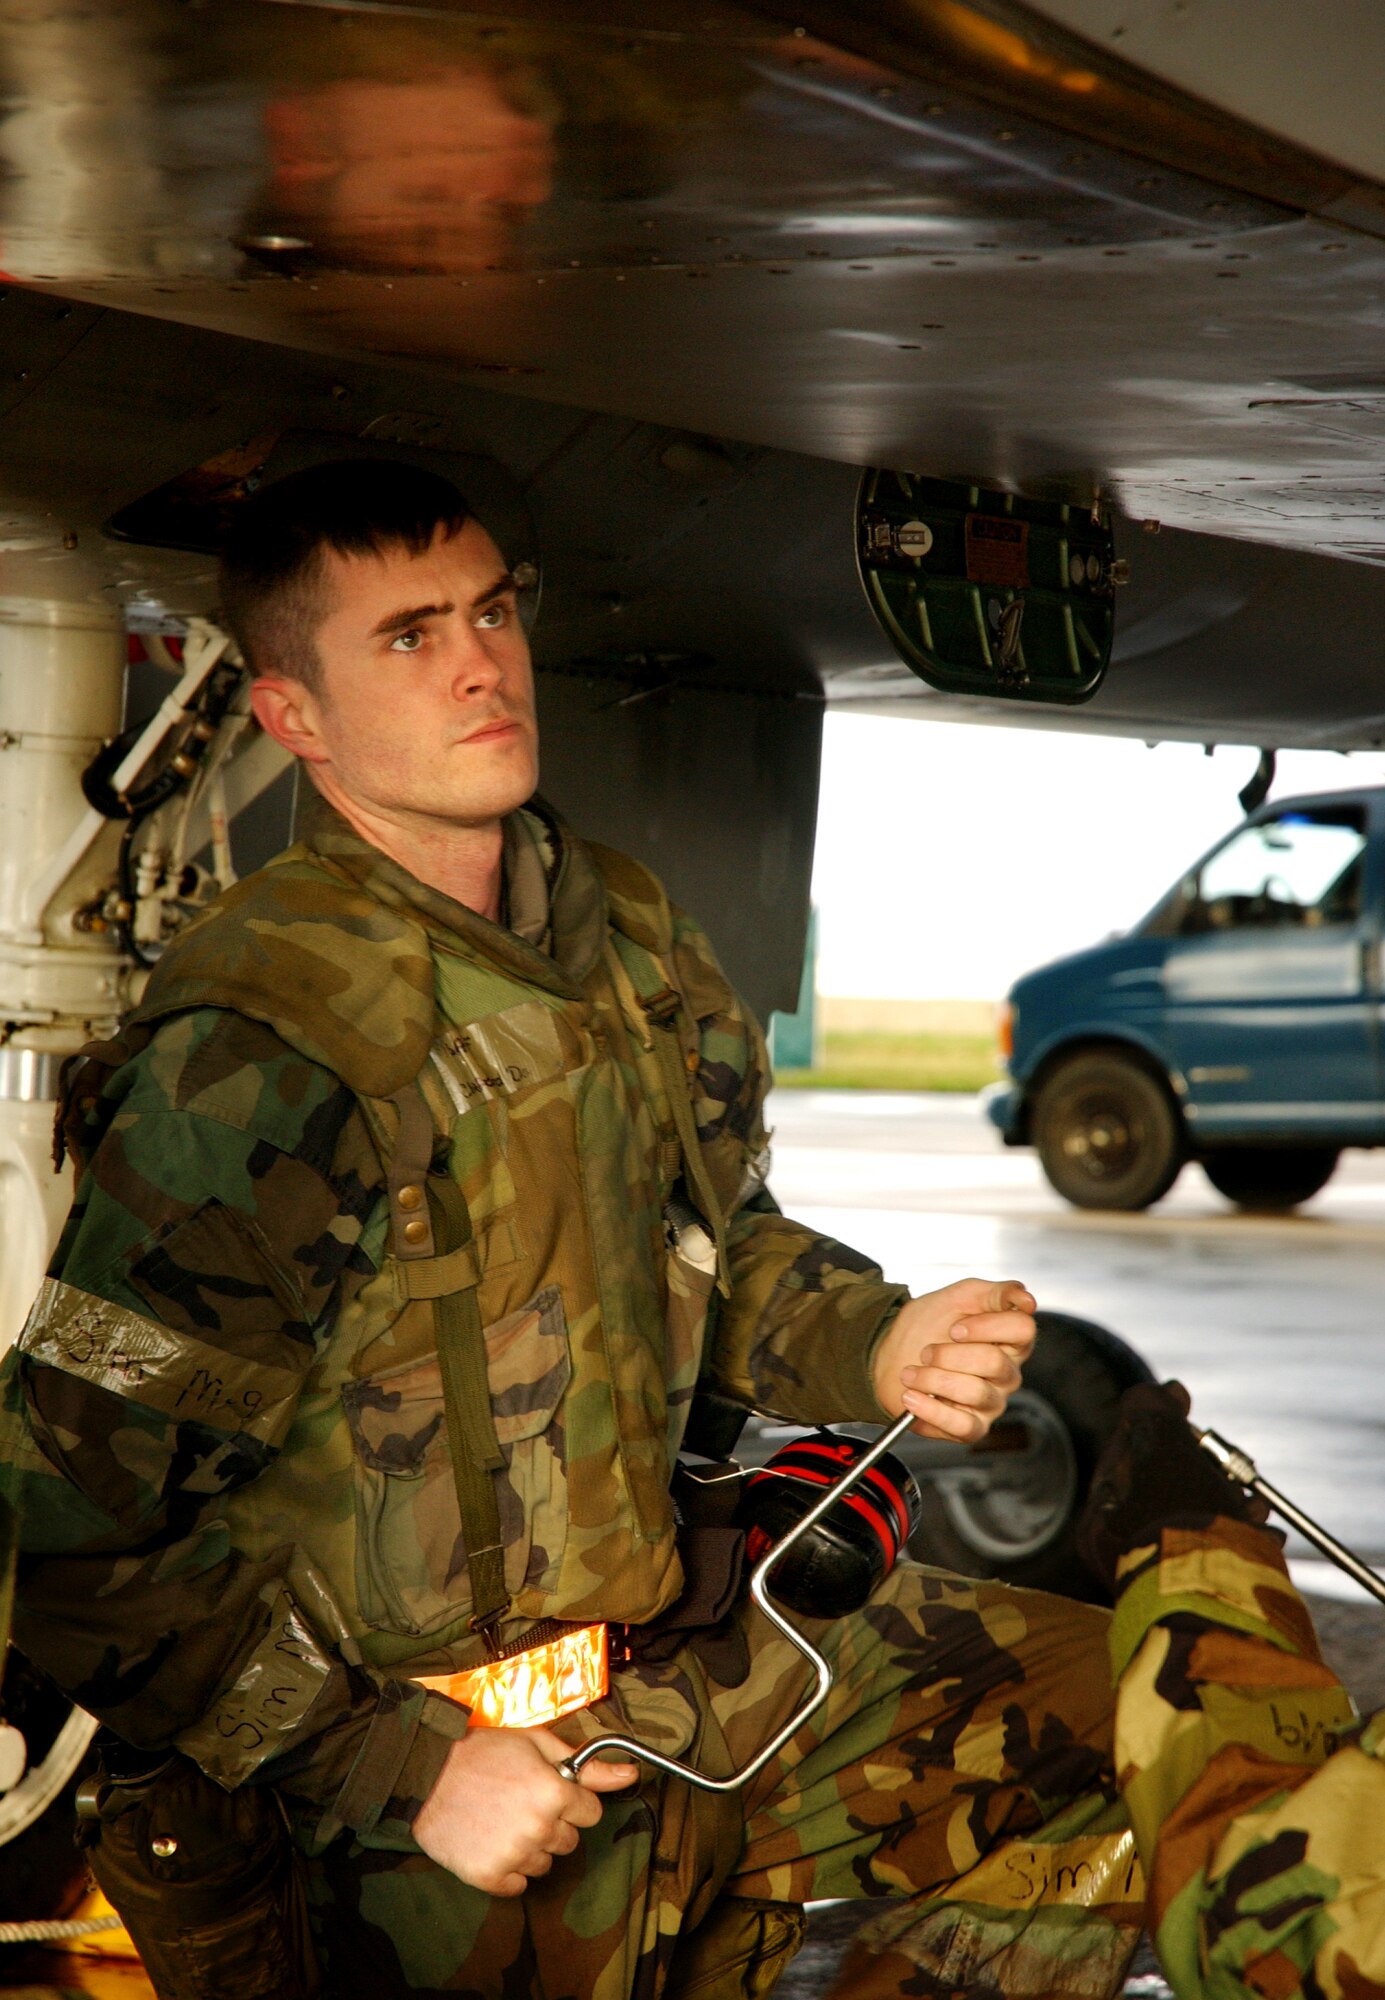 Senior Airman Clifford Daniels, 18th Aircraft Maintenance Squadron assistant dedicated crew chief, checks for any loose bolts under an F-15 Eagle after a right side engine swap during local operational readiness exercise Beverly High 08-4 at Kadena Air Base, Japan, Feb. 14, 2008. The 18th Wing conducted the exercise from Feb. 10 to 15 to test Airmen's ability to respond in contingency situations. 
(U.S. Air Force photo/Senior Airman Jeremy McGuffin) 